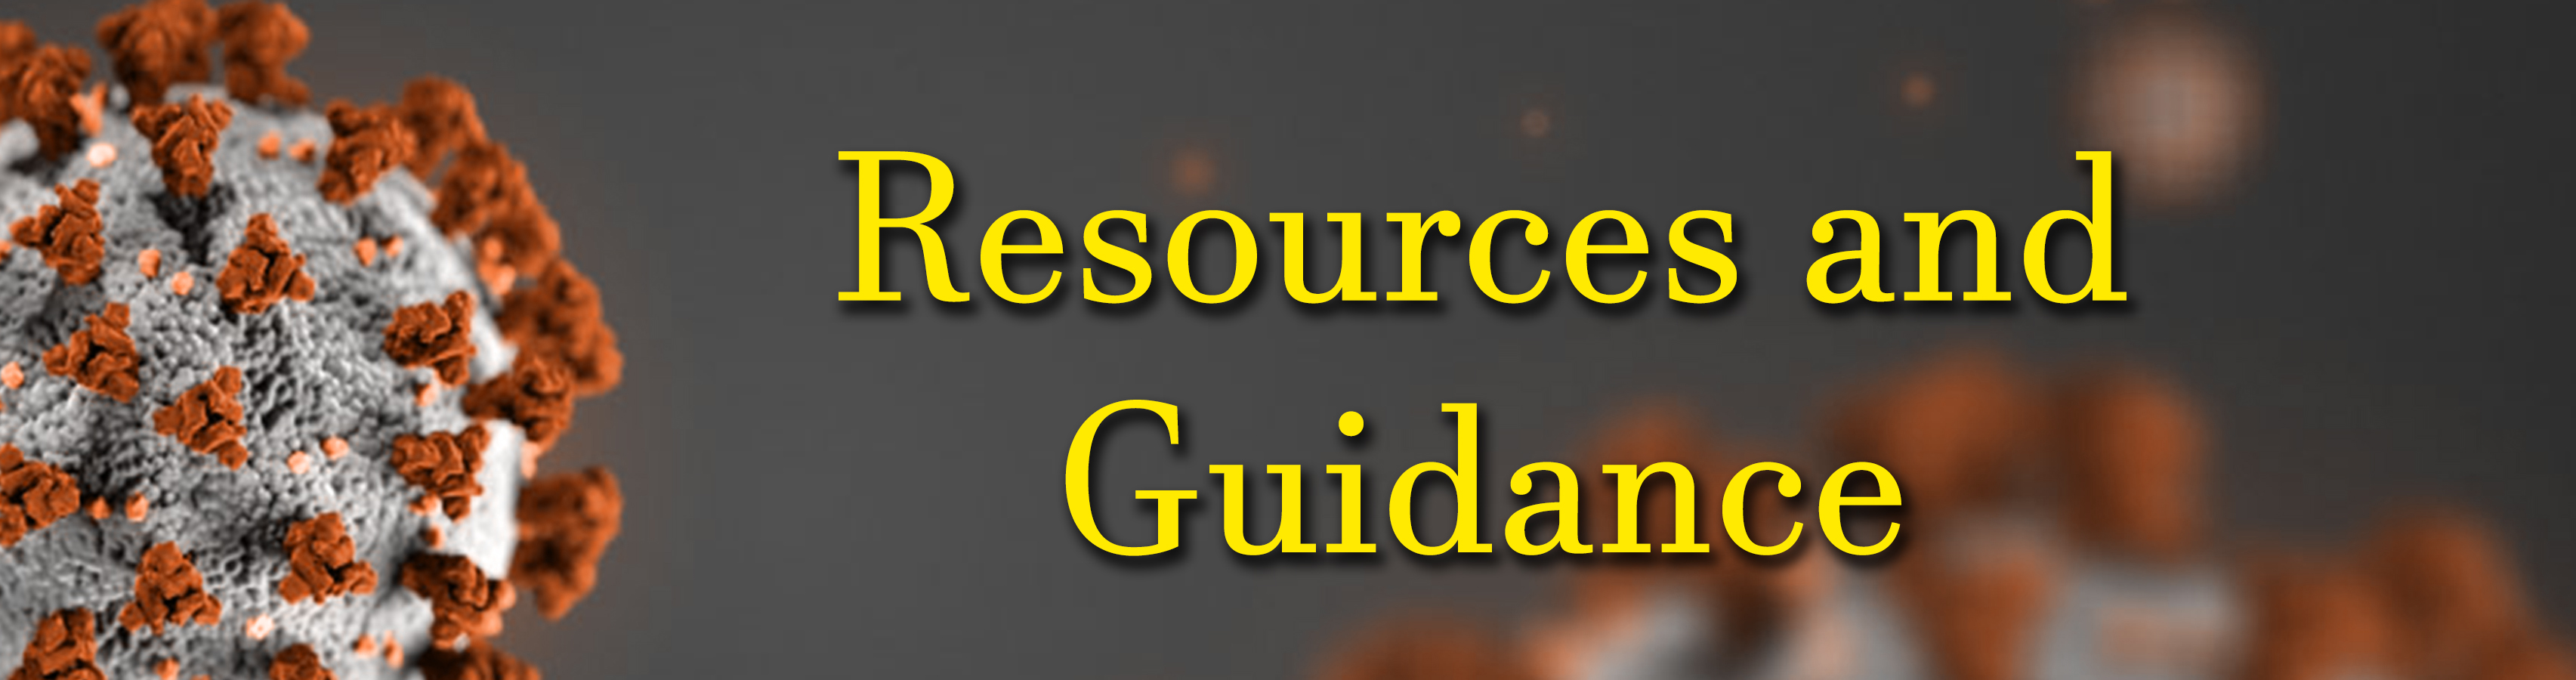 Resources and Guidance graphic